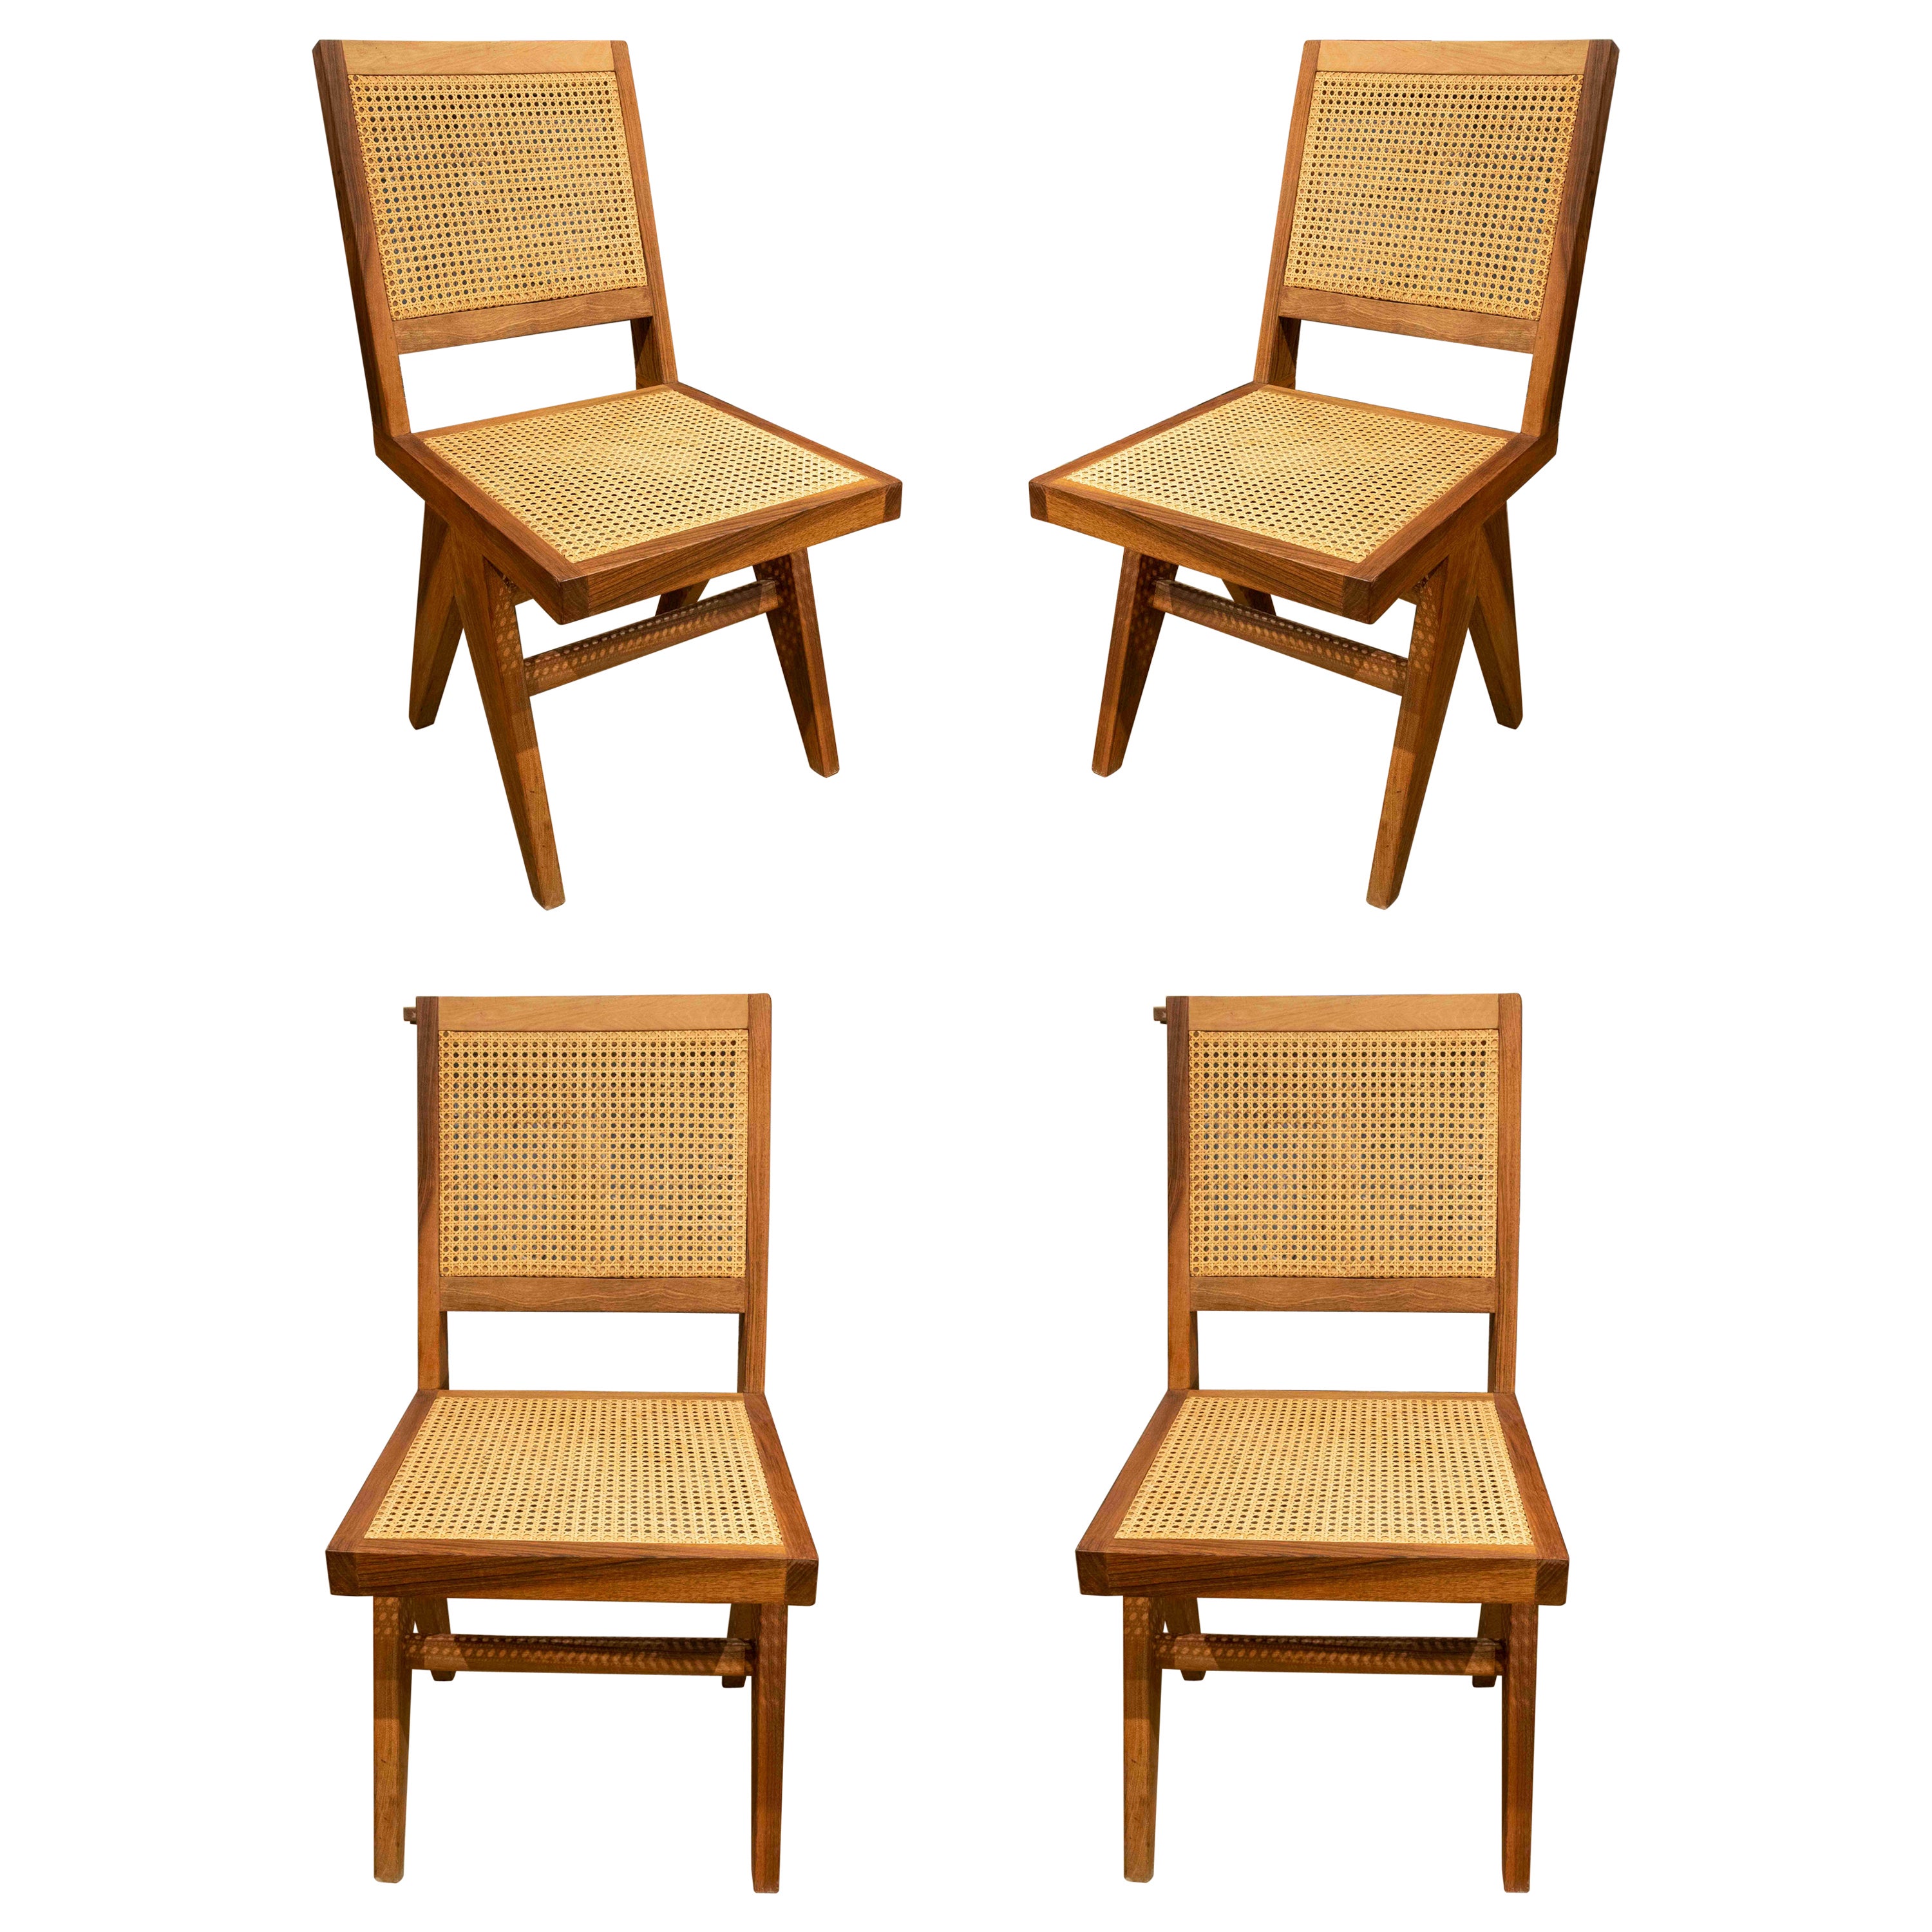 Set of Four Wooden Chairs with Wicker Grid Seat and Backrest For Sale